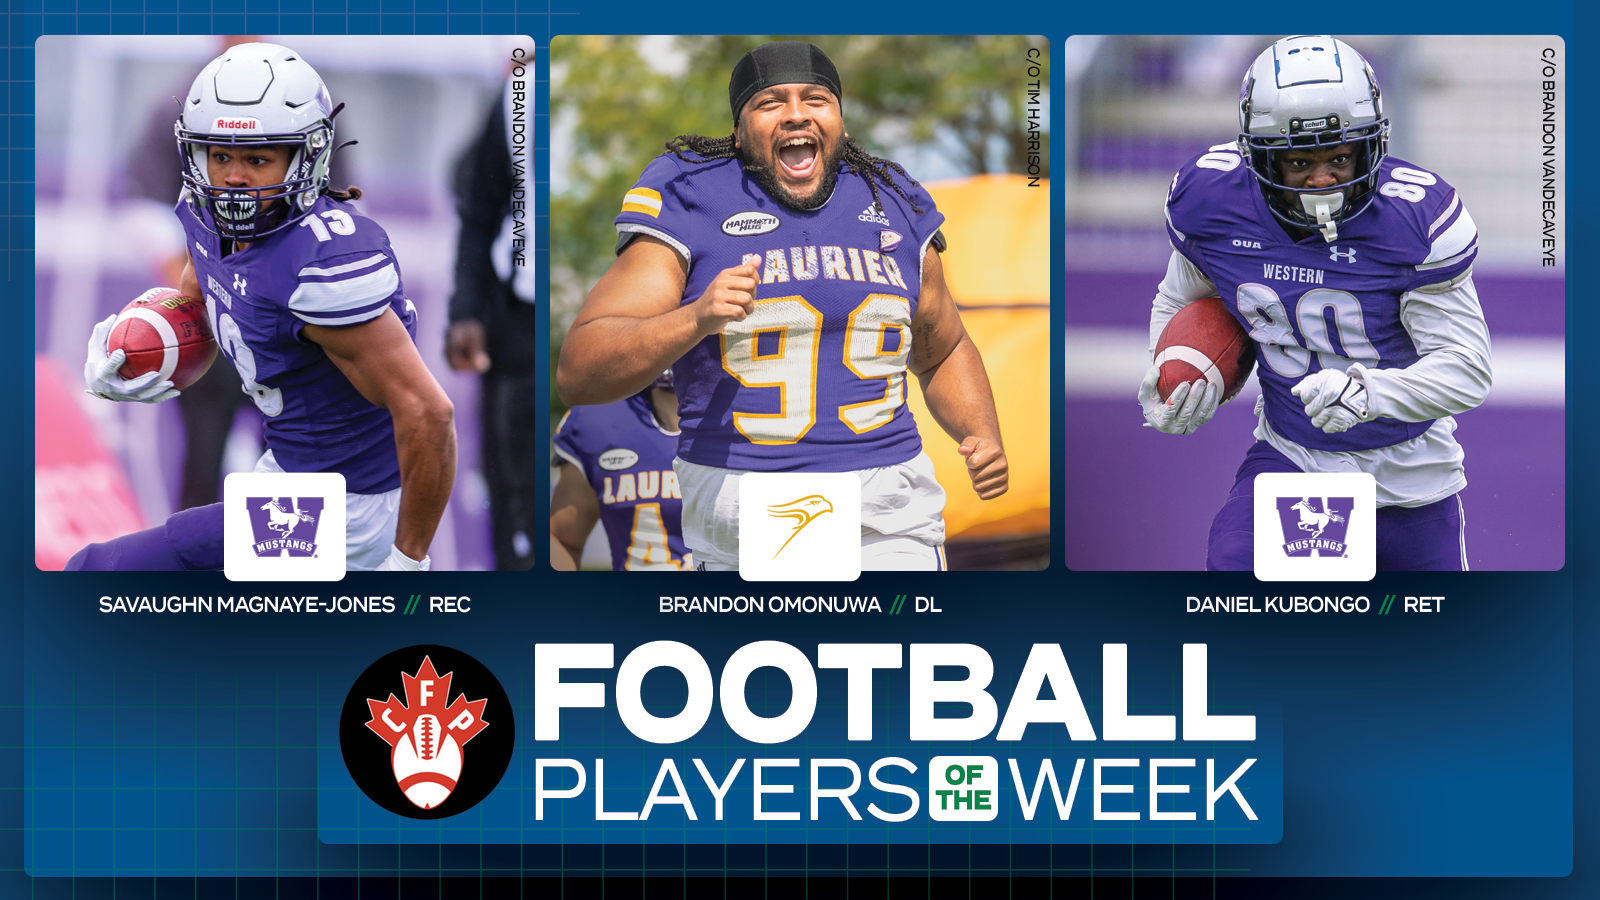 Graphic on predominantly blue background featuring action photos of Western's Savaughn Magnaye-Jones, Laurier's Brandon Omonuwa, and Western's Daniel Kubongo, with the Canadian Football Perspective logo and white text reading, 'Football Players of the Week' included below them